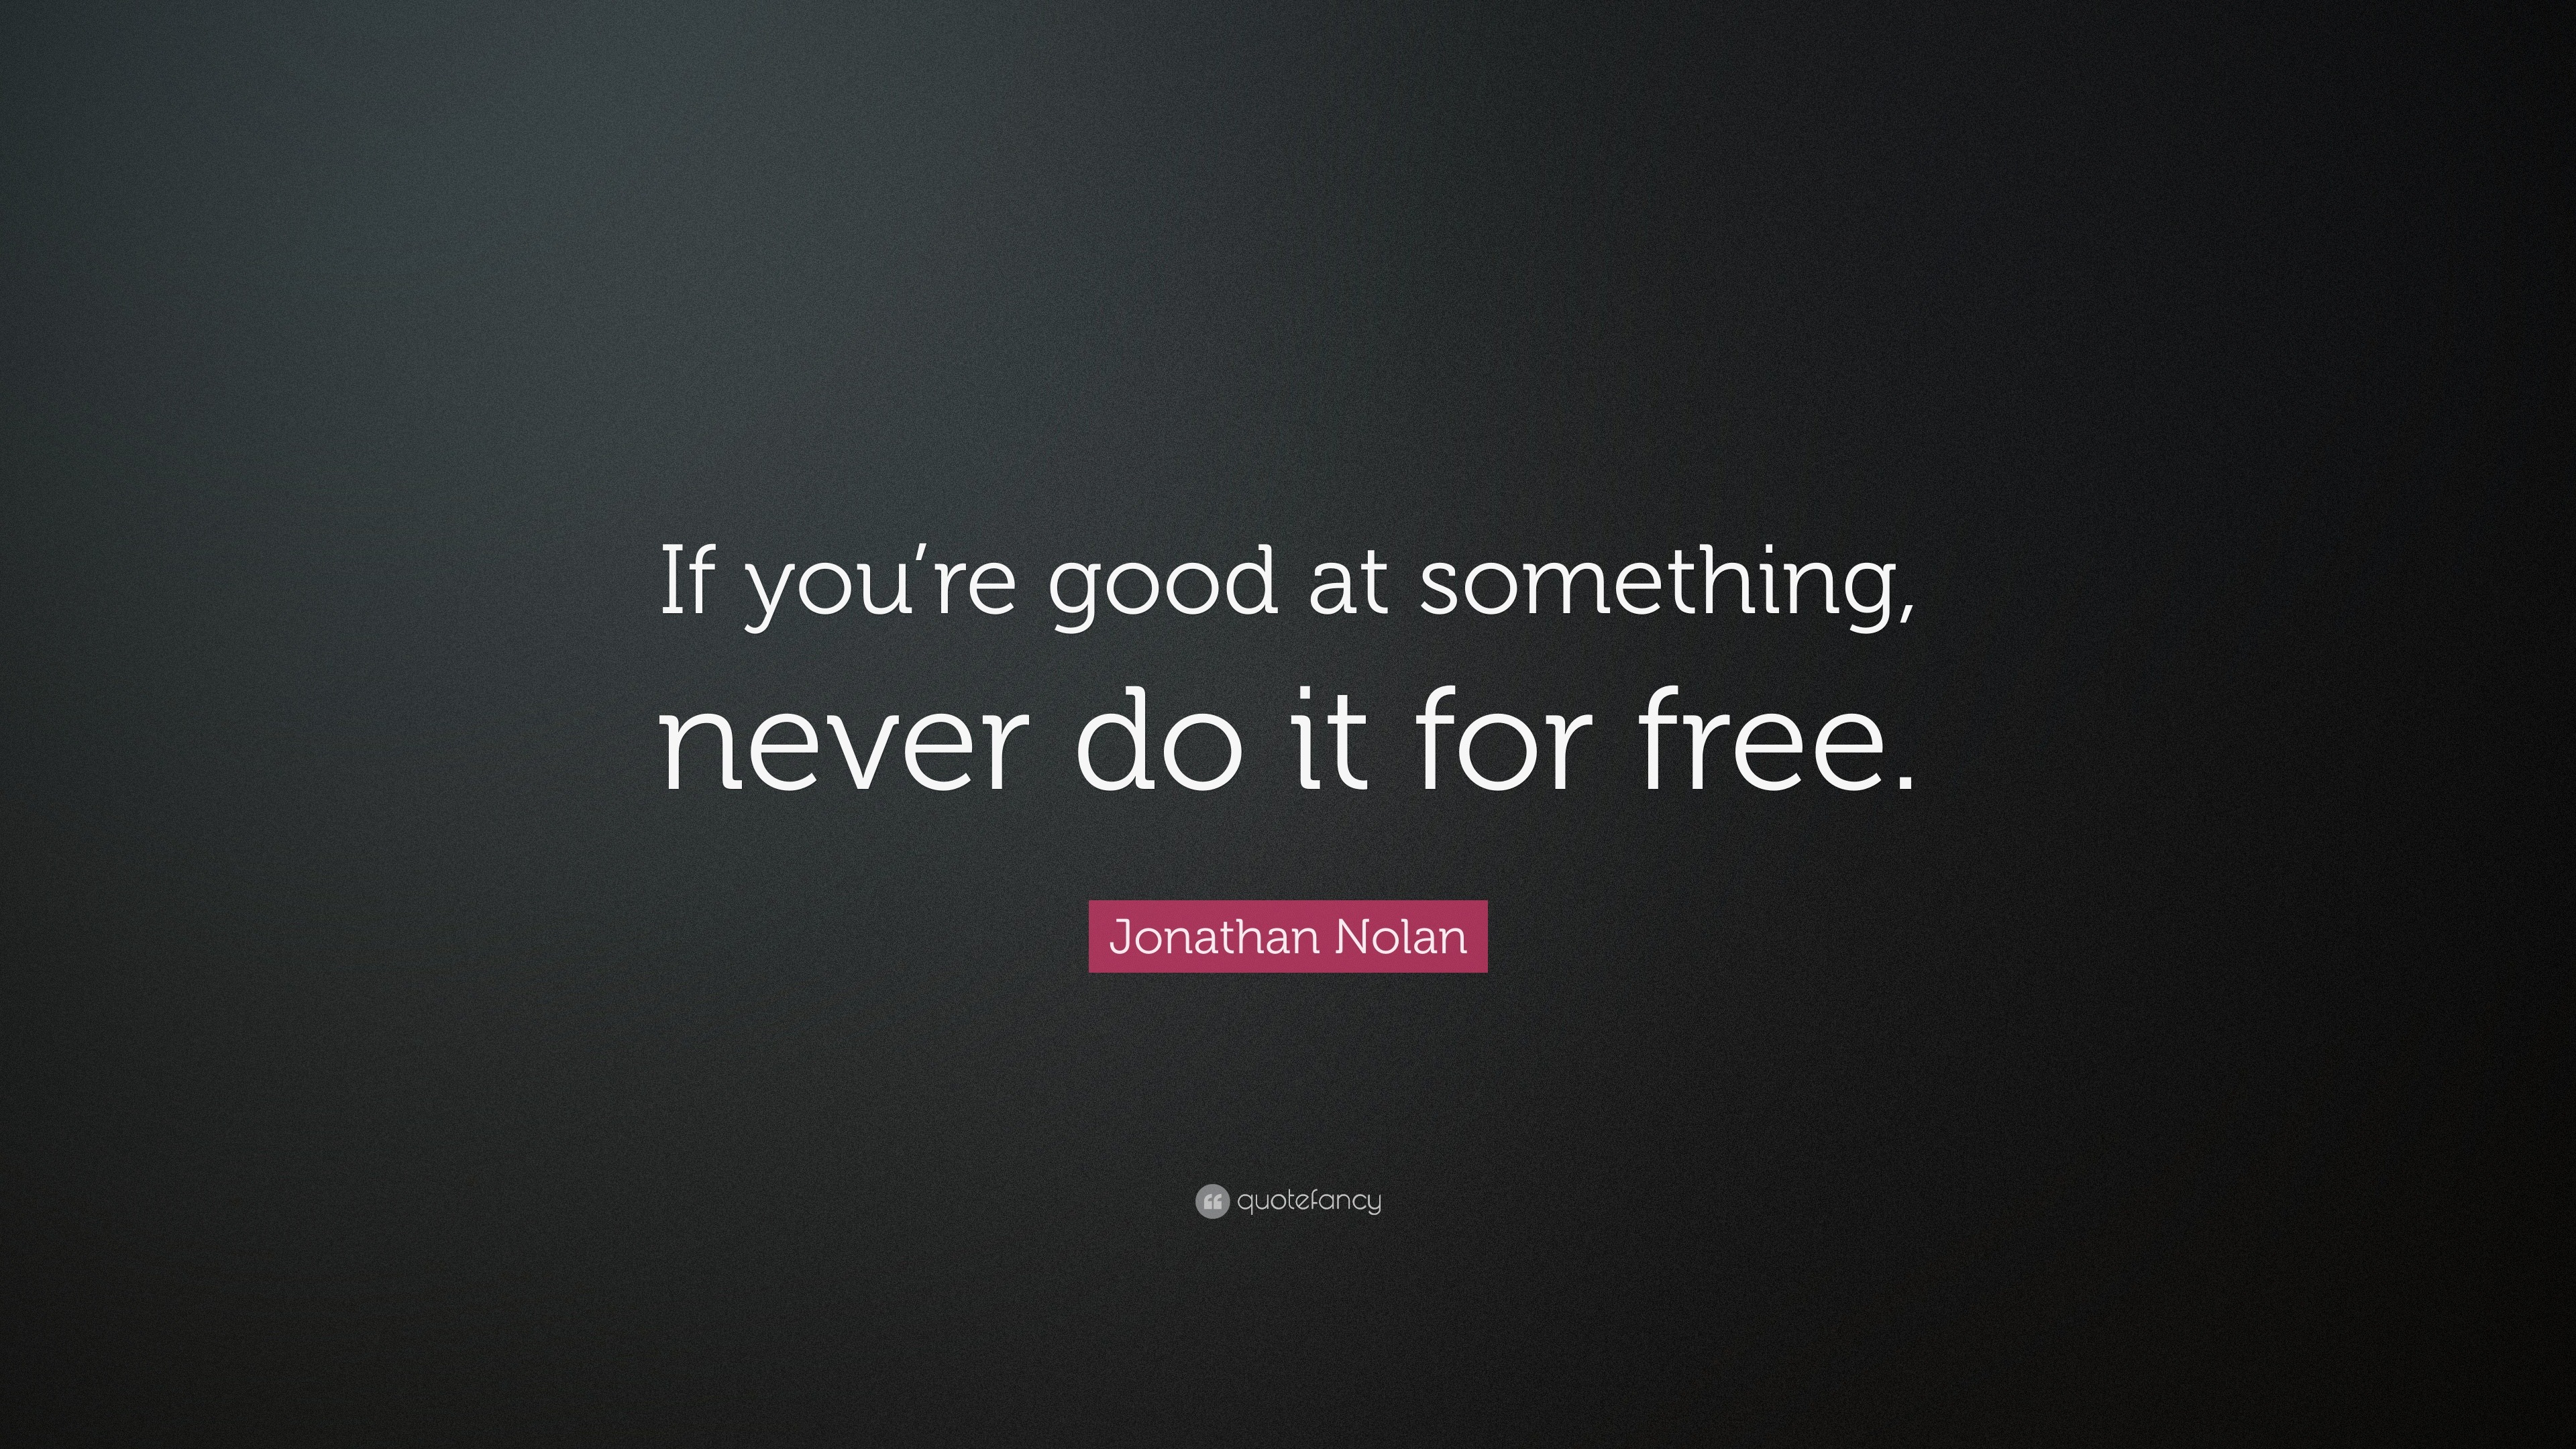 Jonathan Nolan Quote If You Re Good At Something Never Do It For Free